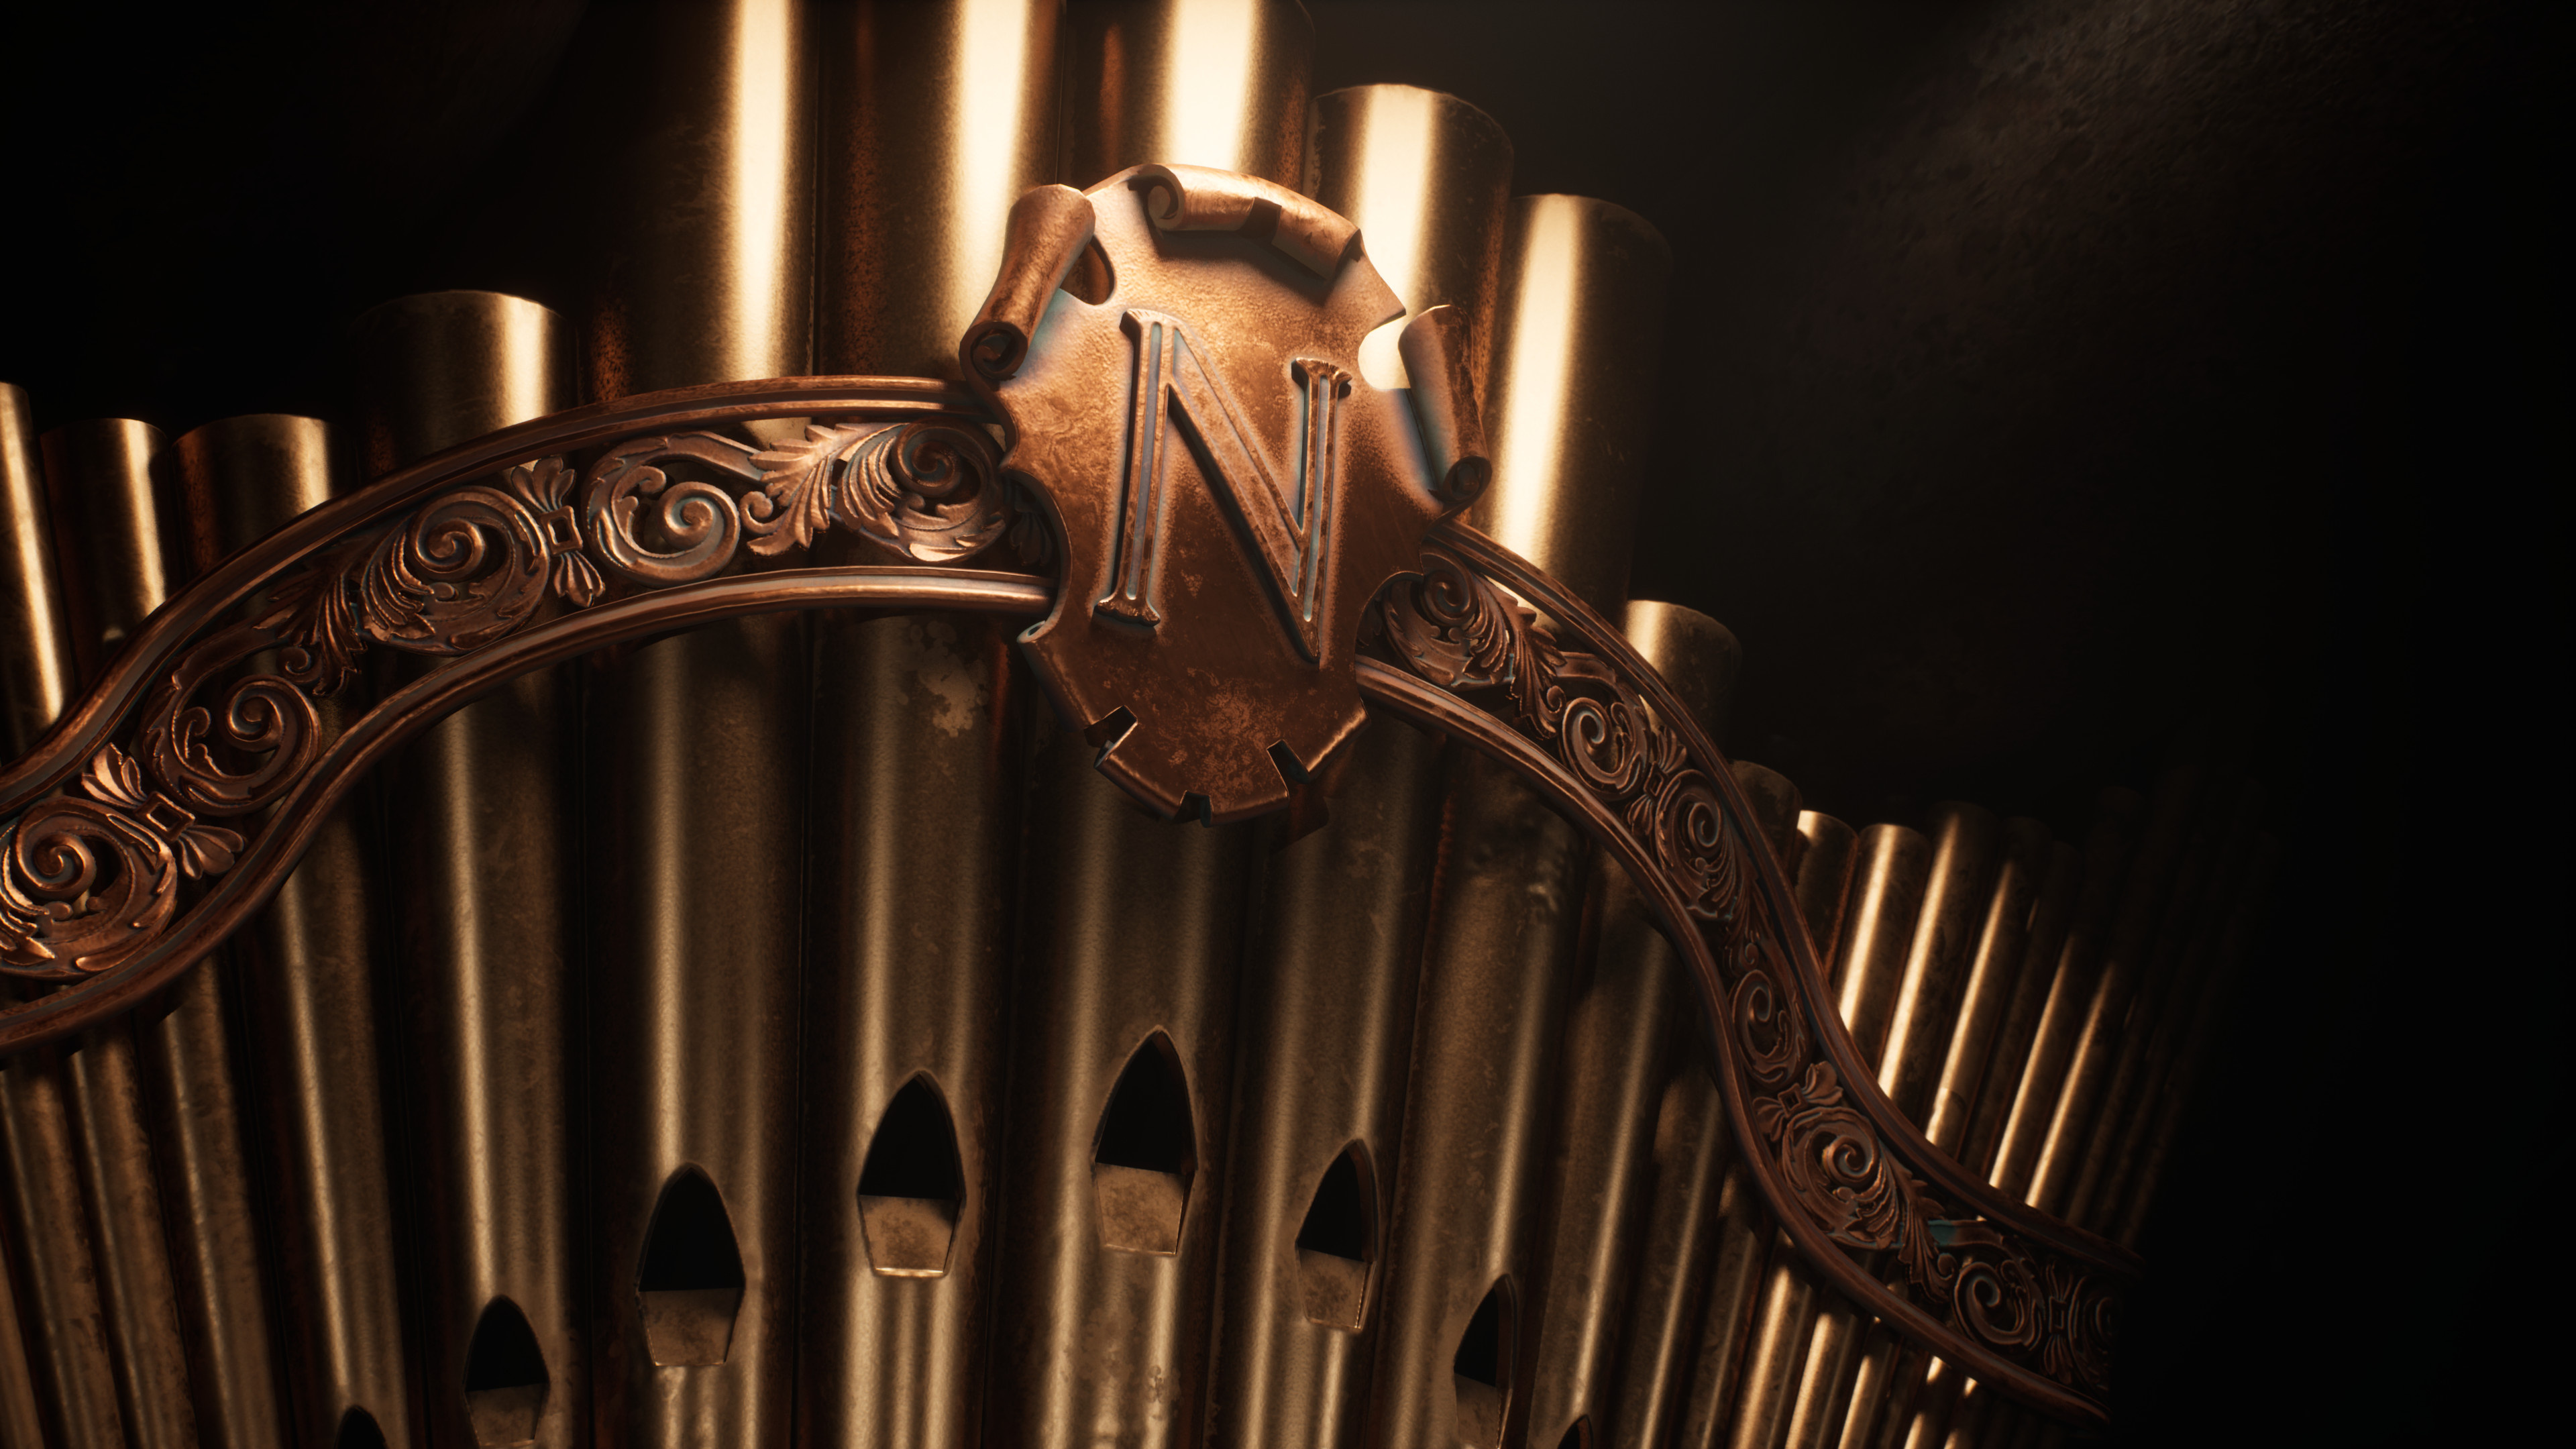 Pipe Organ: Nautilus, The tubes are provided in sets called ranks each of which has a common timbre. 3840x2160 4K Wallpaper.